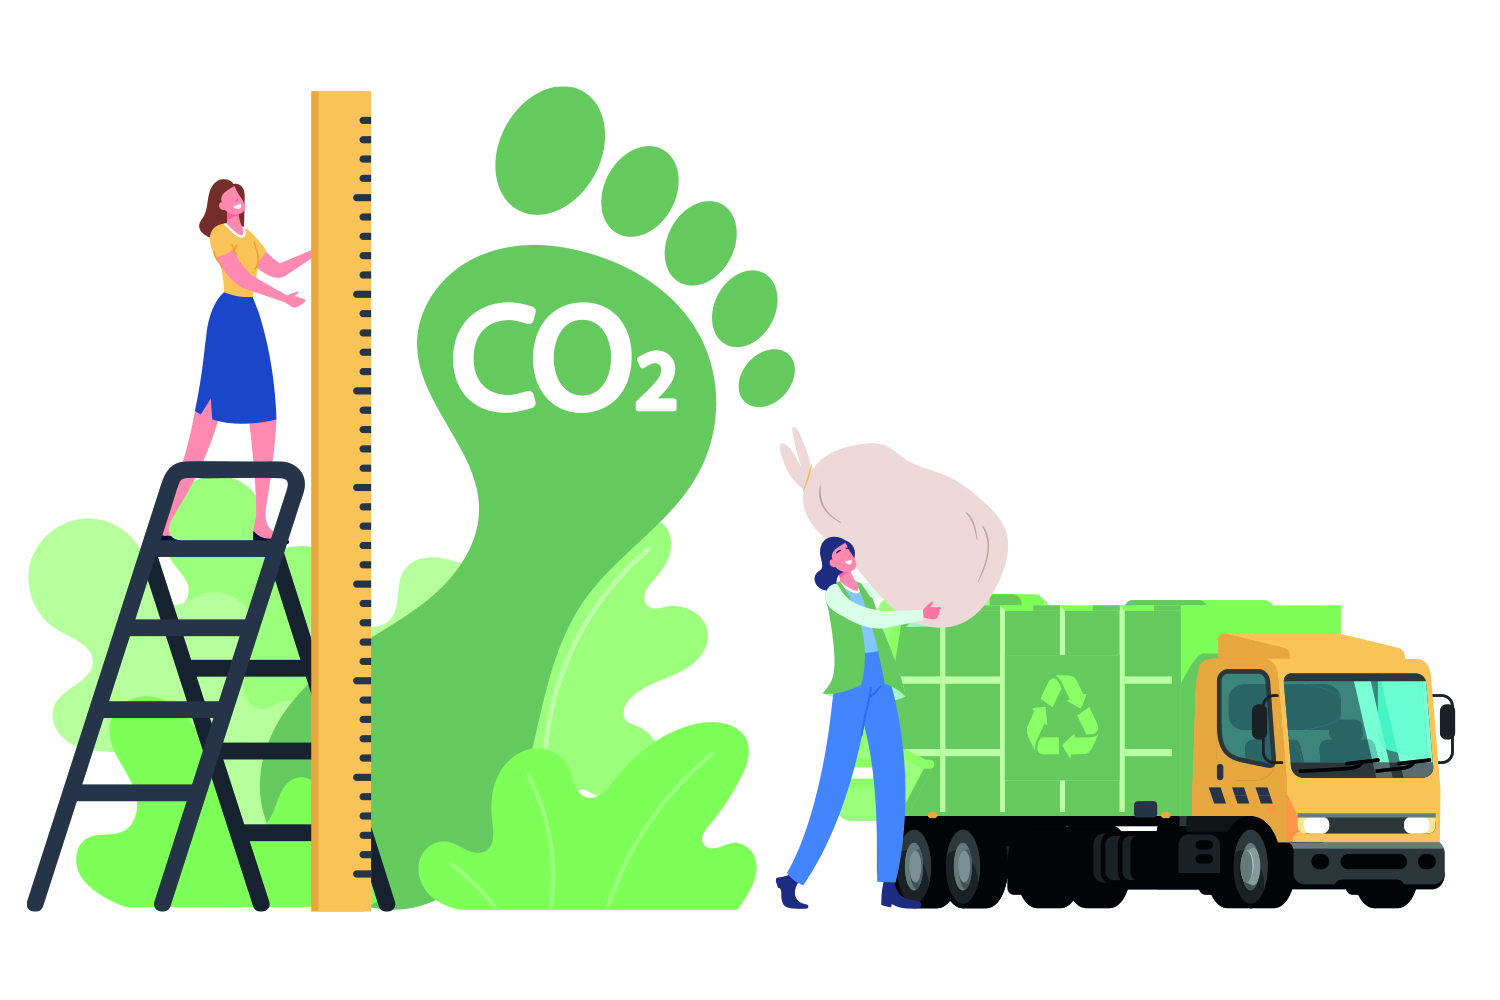 Graphic of woman on ladder measuring giant green footprint and of waste collection truck